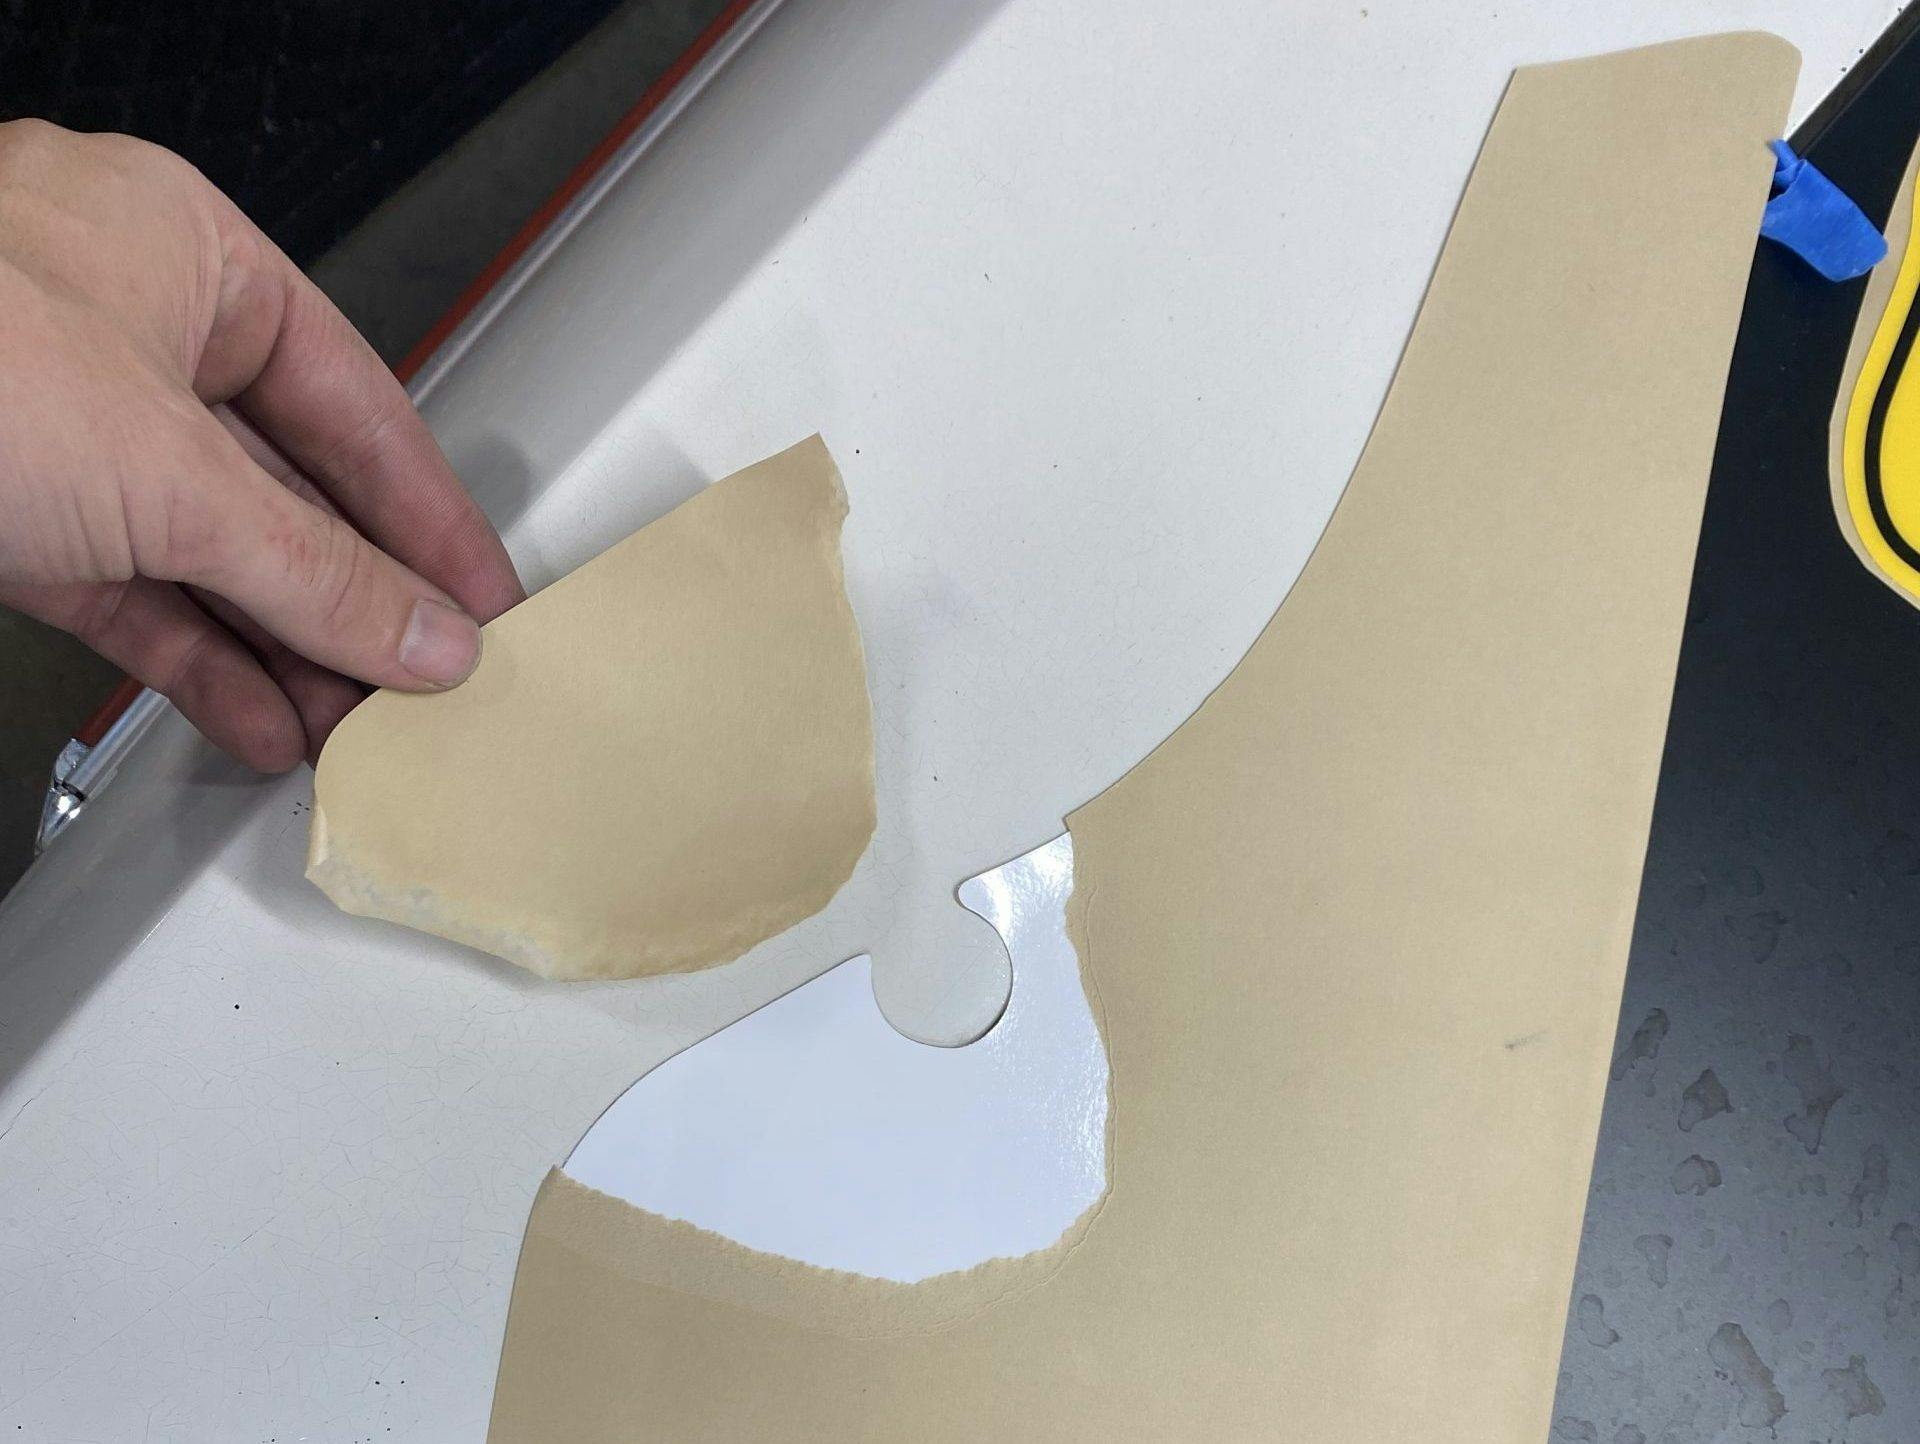 removing a portion of the decal backing